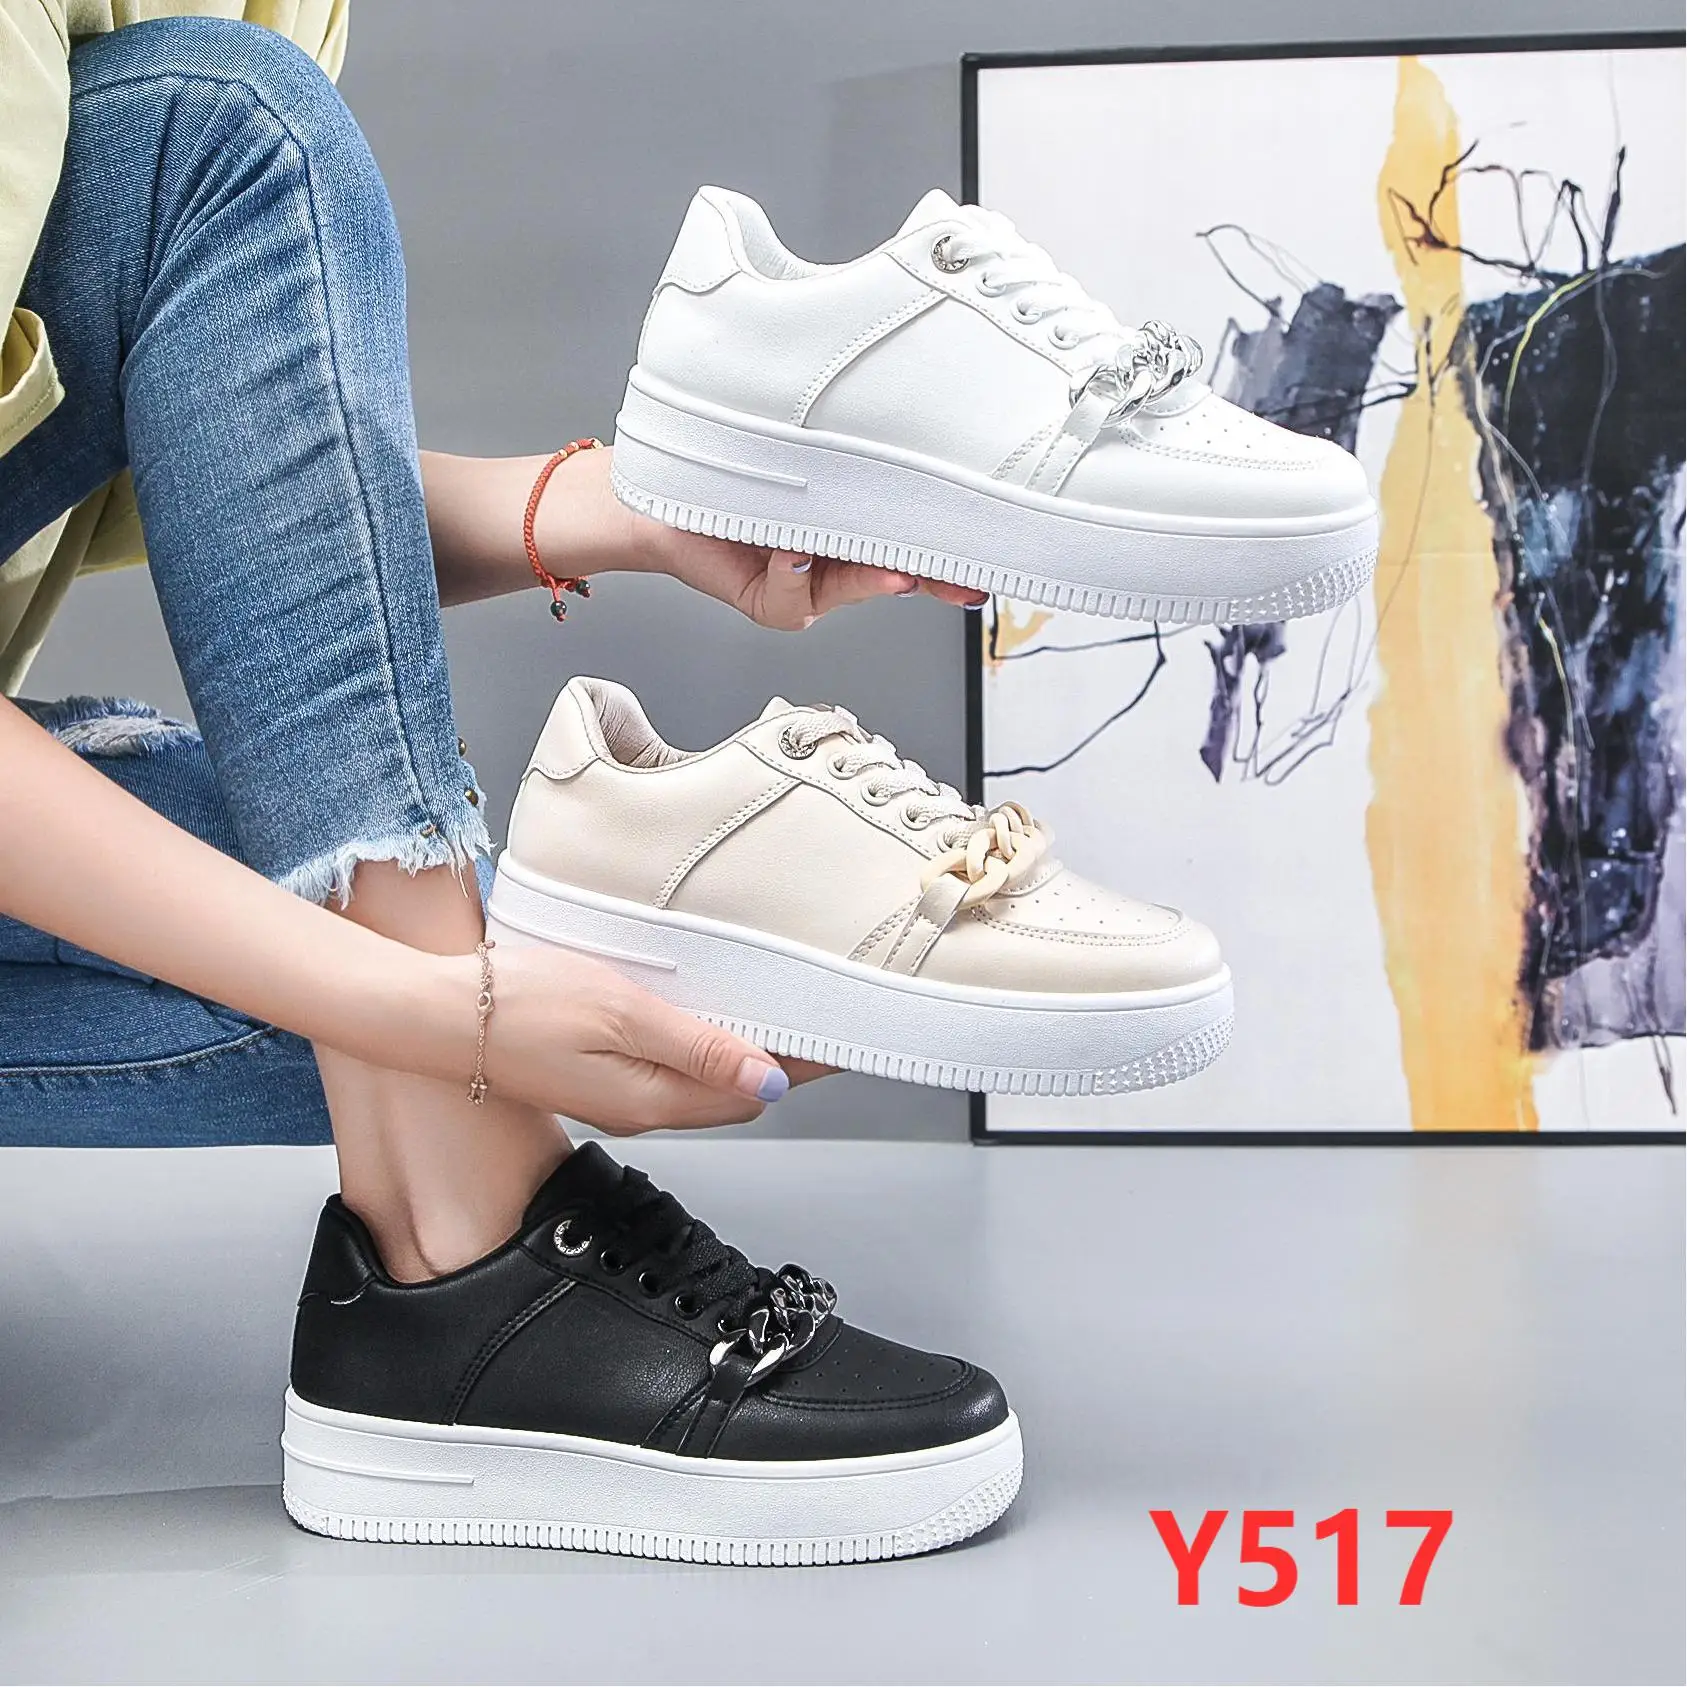 2022 Flat Sport Shoes White Running Sneakers New Arrivals Girls Lace Up Graffiti Printing Fashion Casual shoes